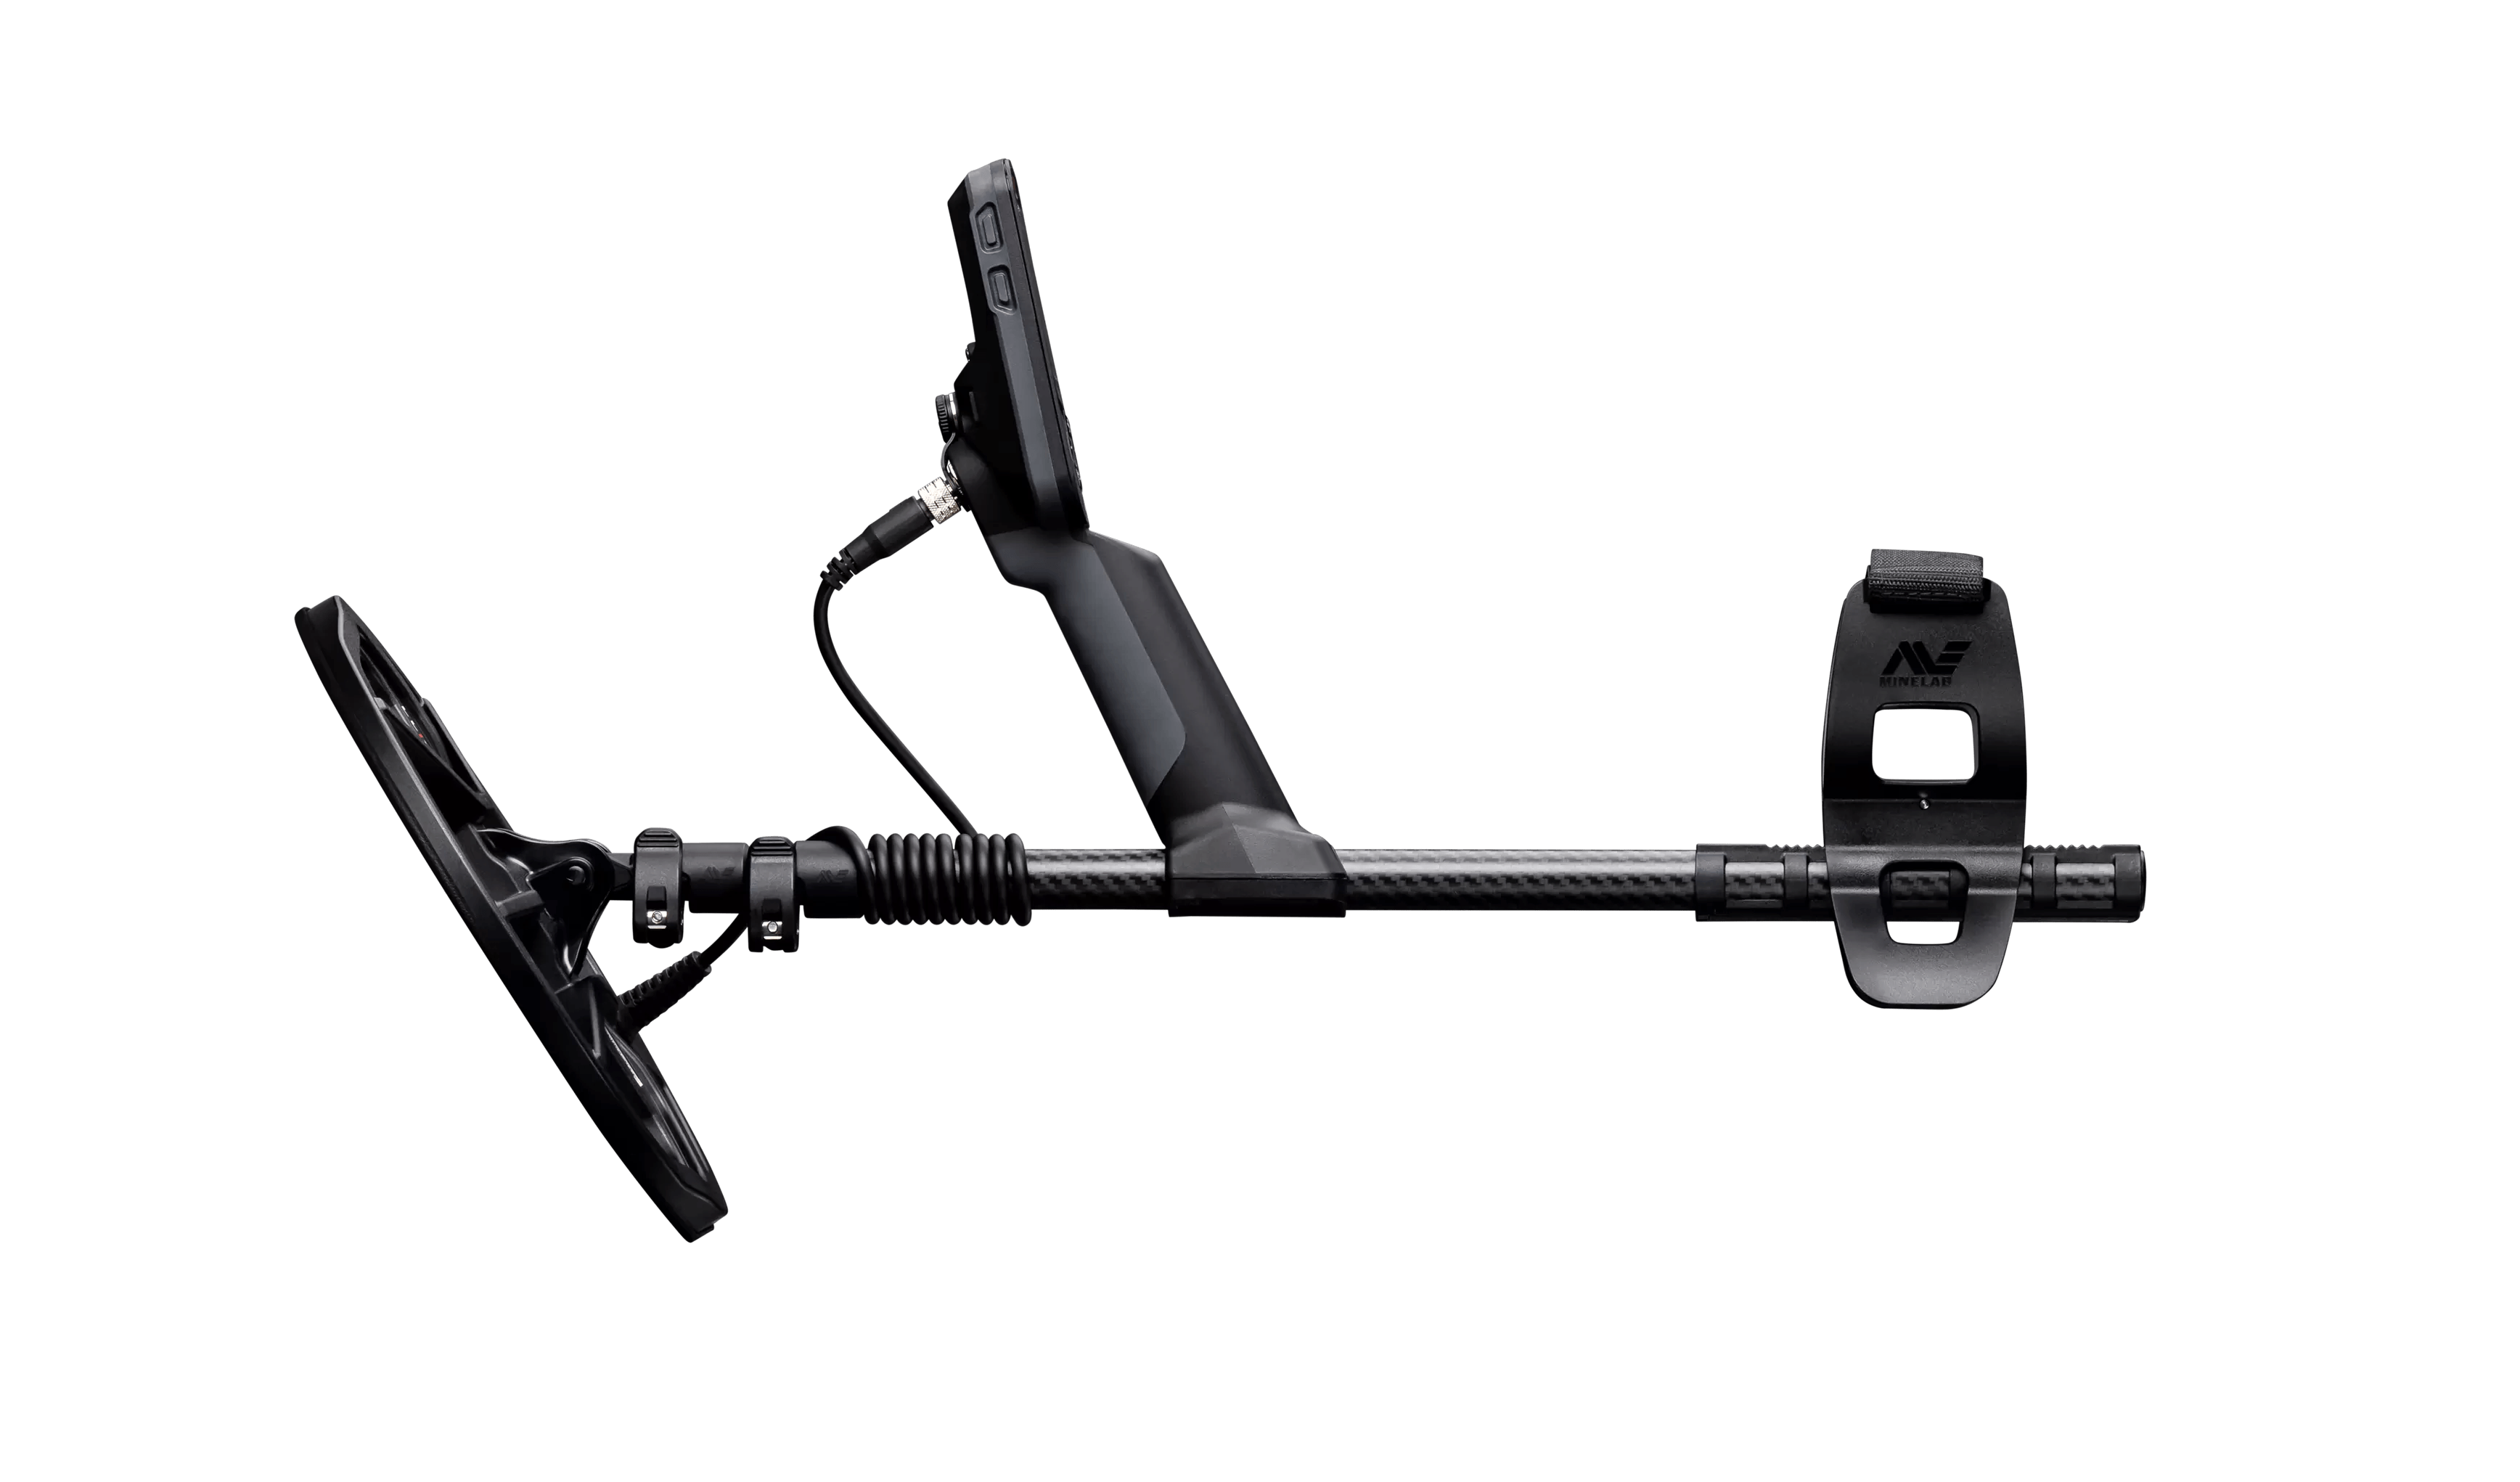 Minelab Equinox 700 - Now Available